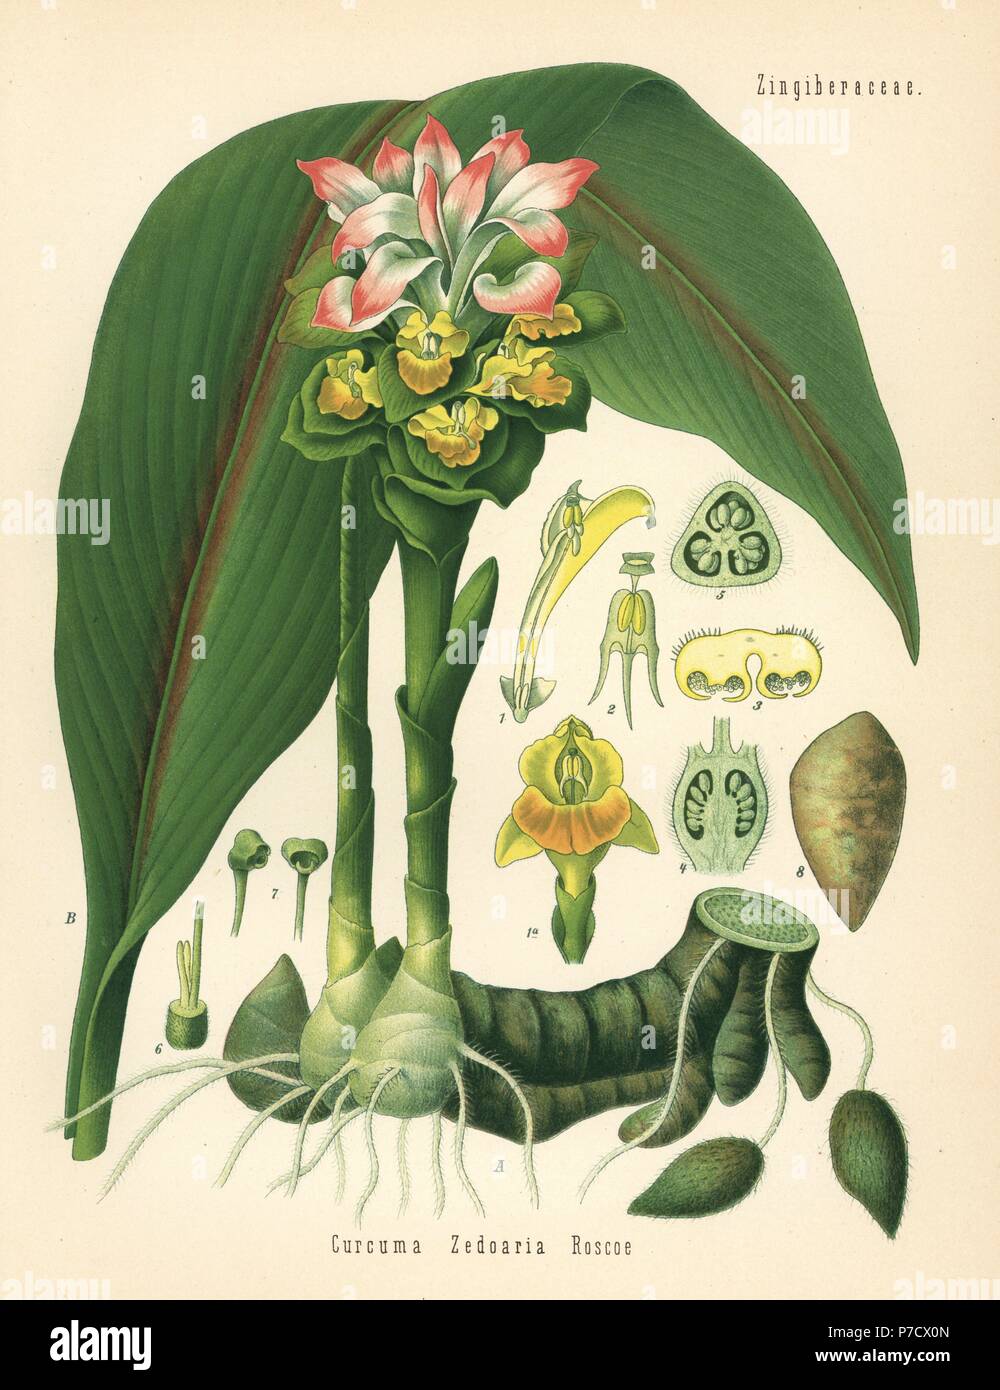 Zedoary or white turmeric, Curcuma zedoaria. Chromolithograph after a botanical illustration from Hermann Adolph Koehler's Medicinal Plants, edited by Gustav Pabst, Koehler, Germany, 1887. Stock Photo